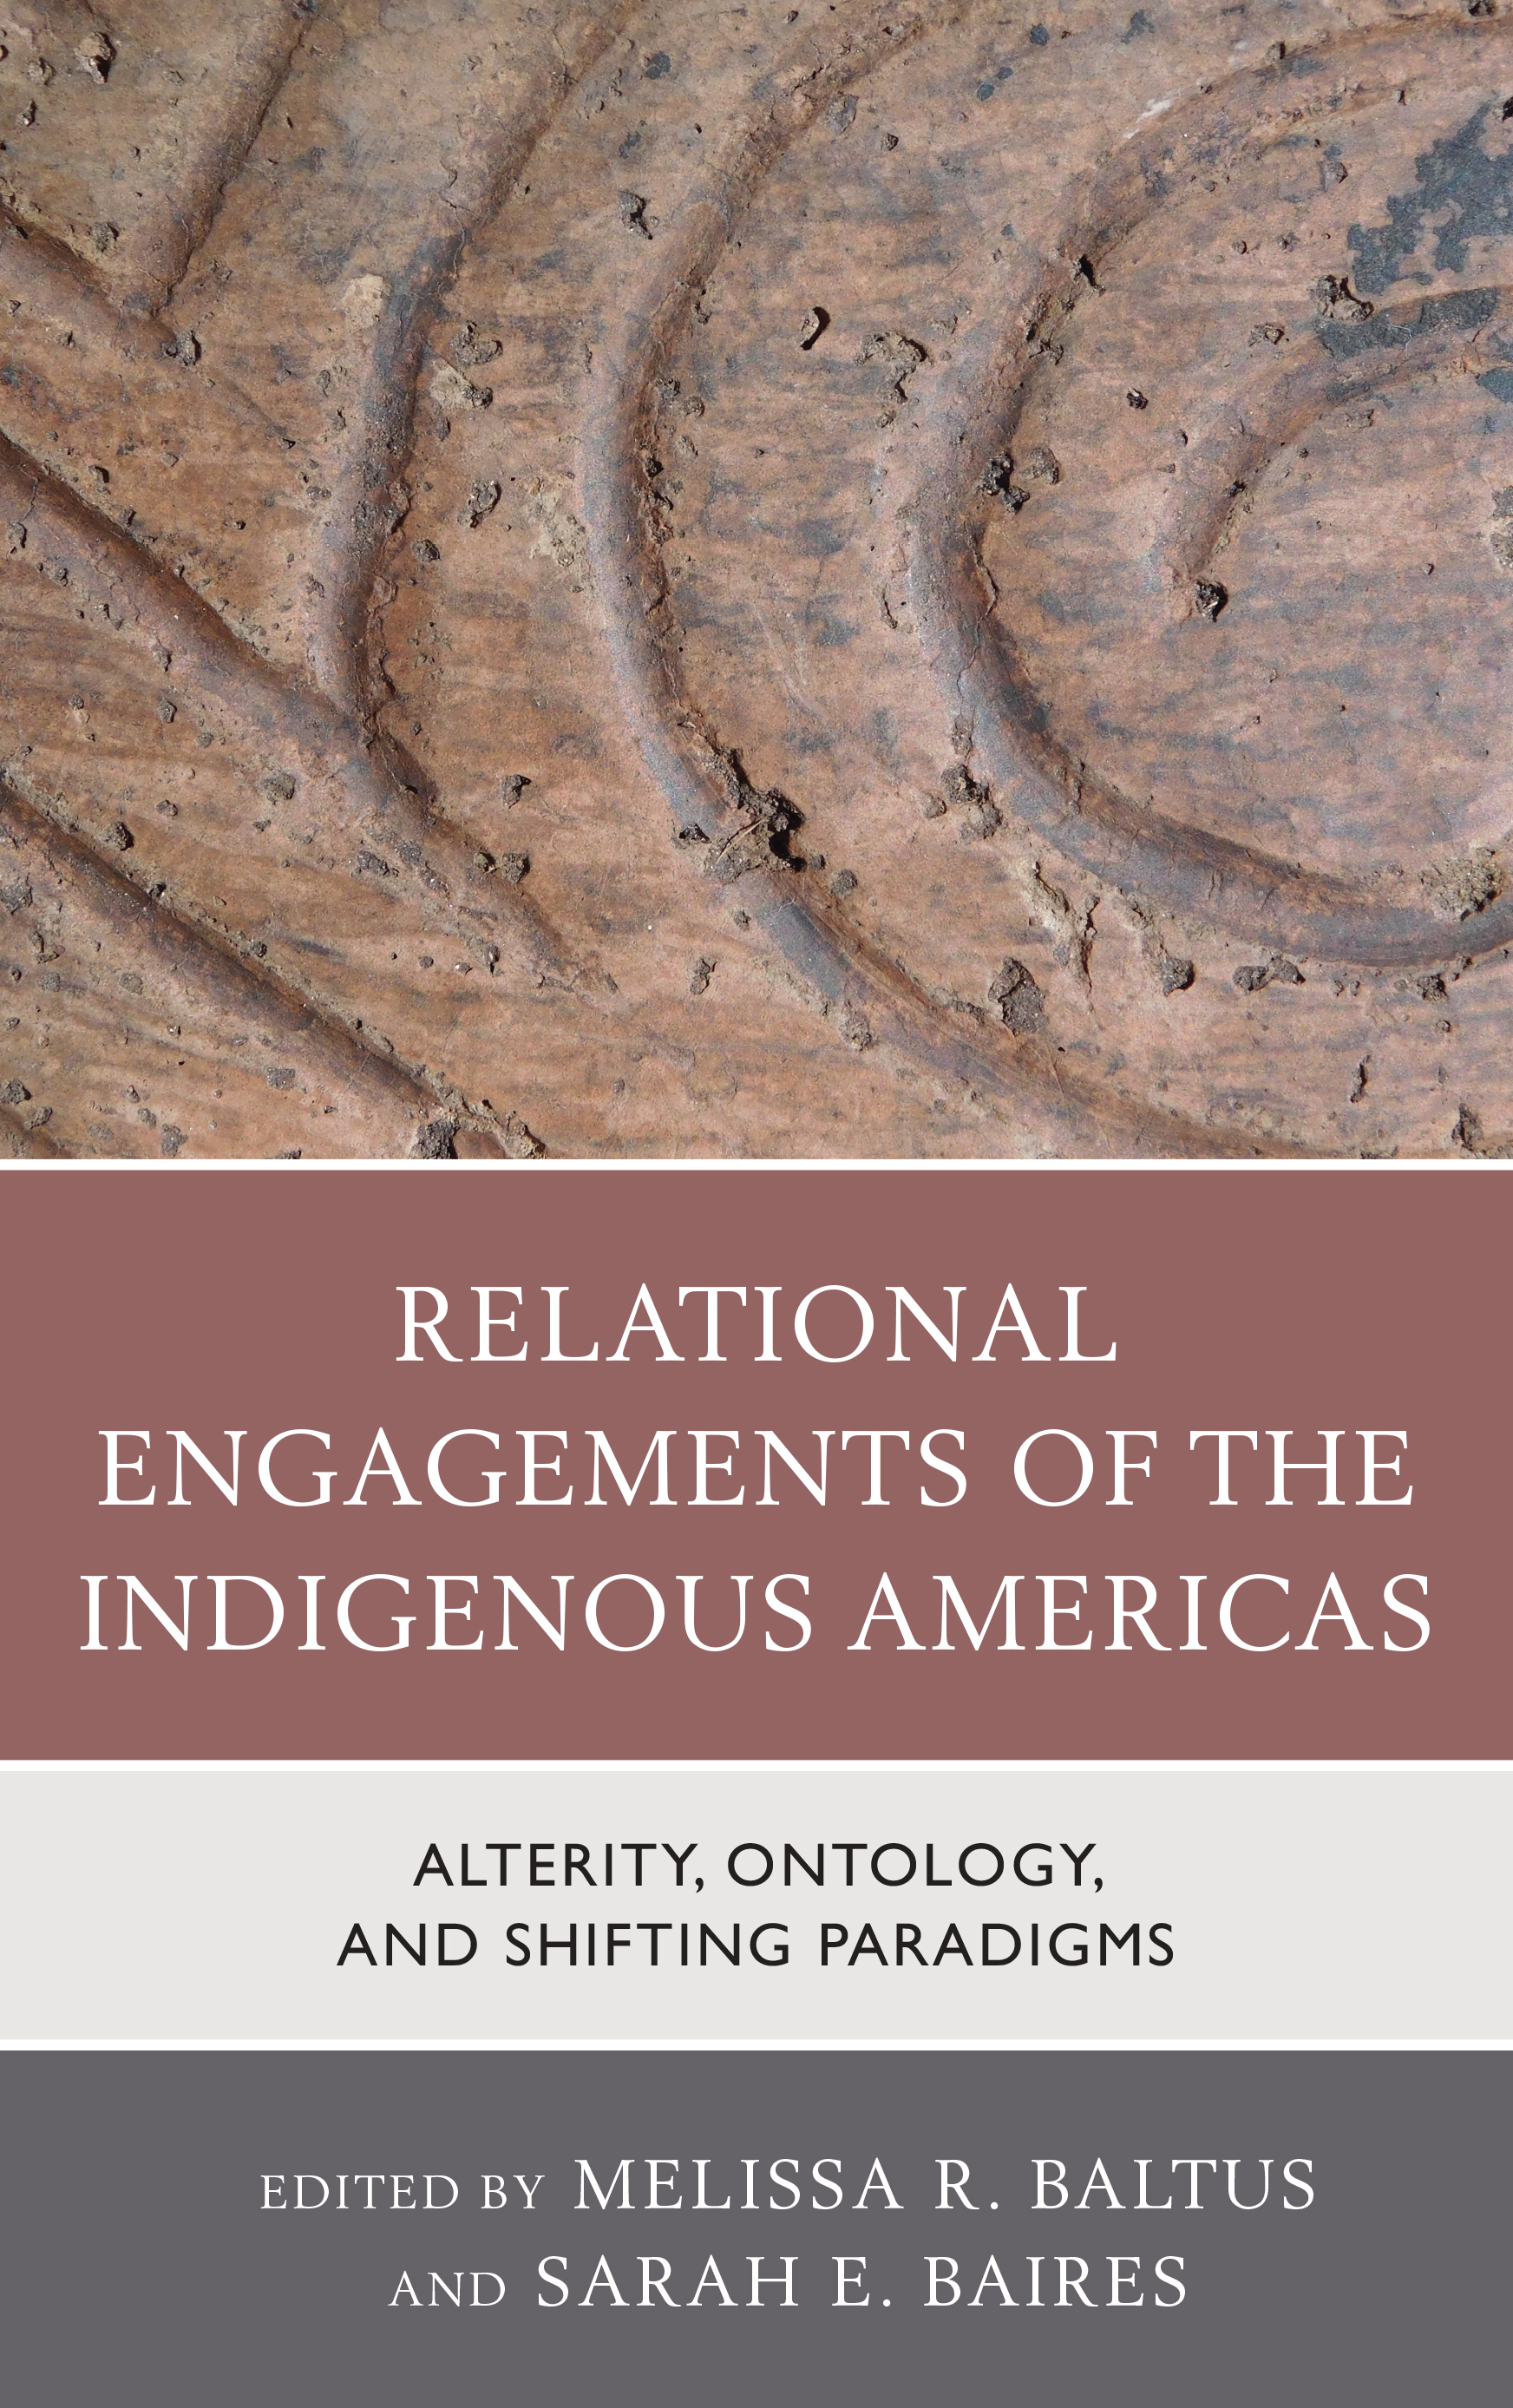 Relational Engagements of the Indigenous Americas: Alterity, Ontology, and Shifting Paradigms